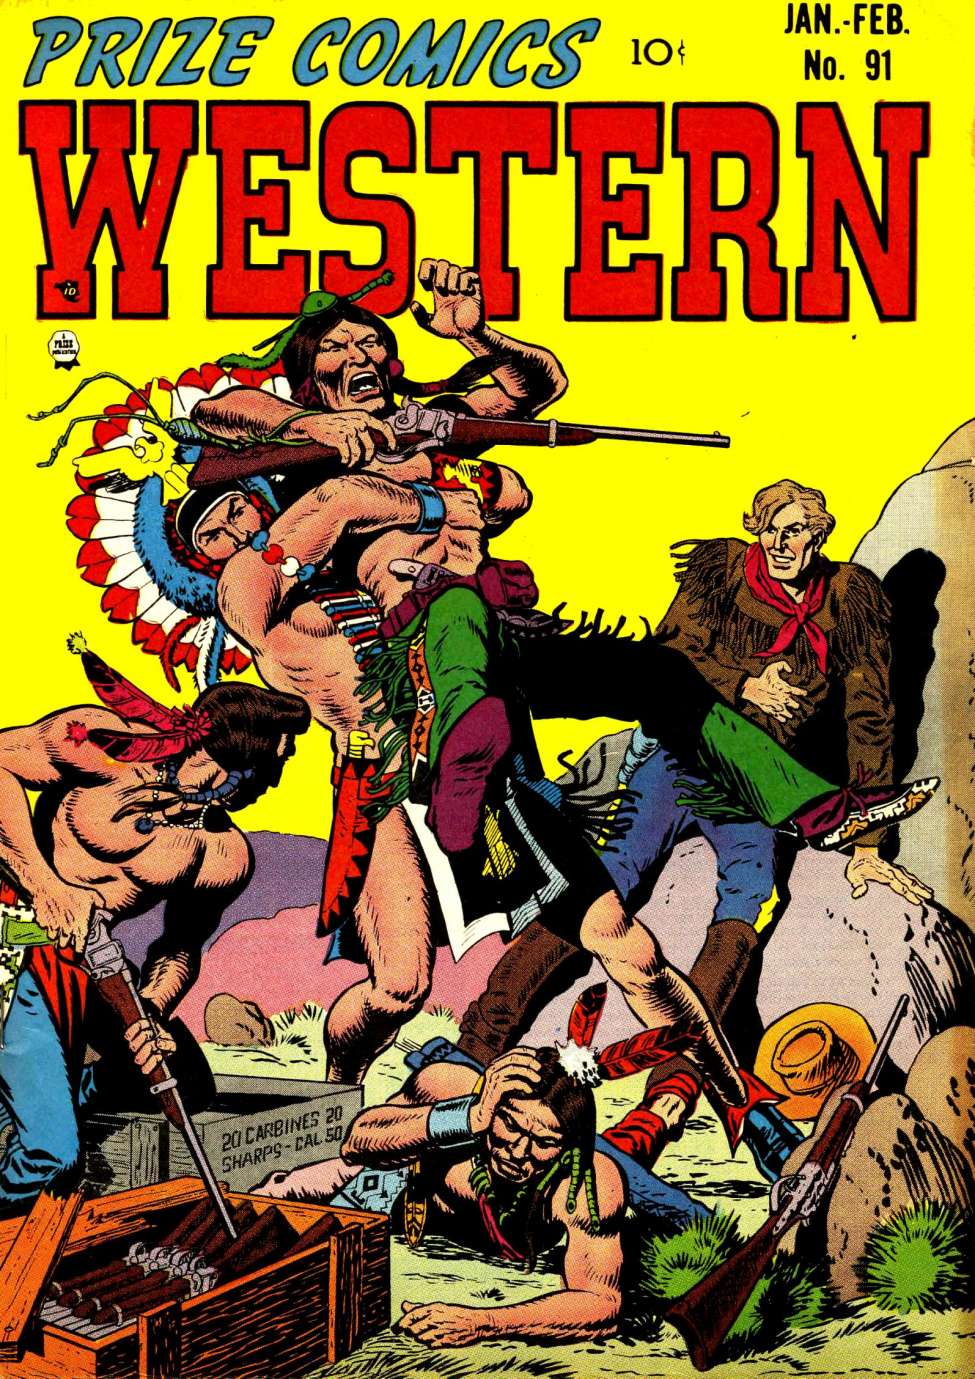 Book Cover For Prize Comics Western 91